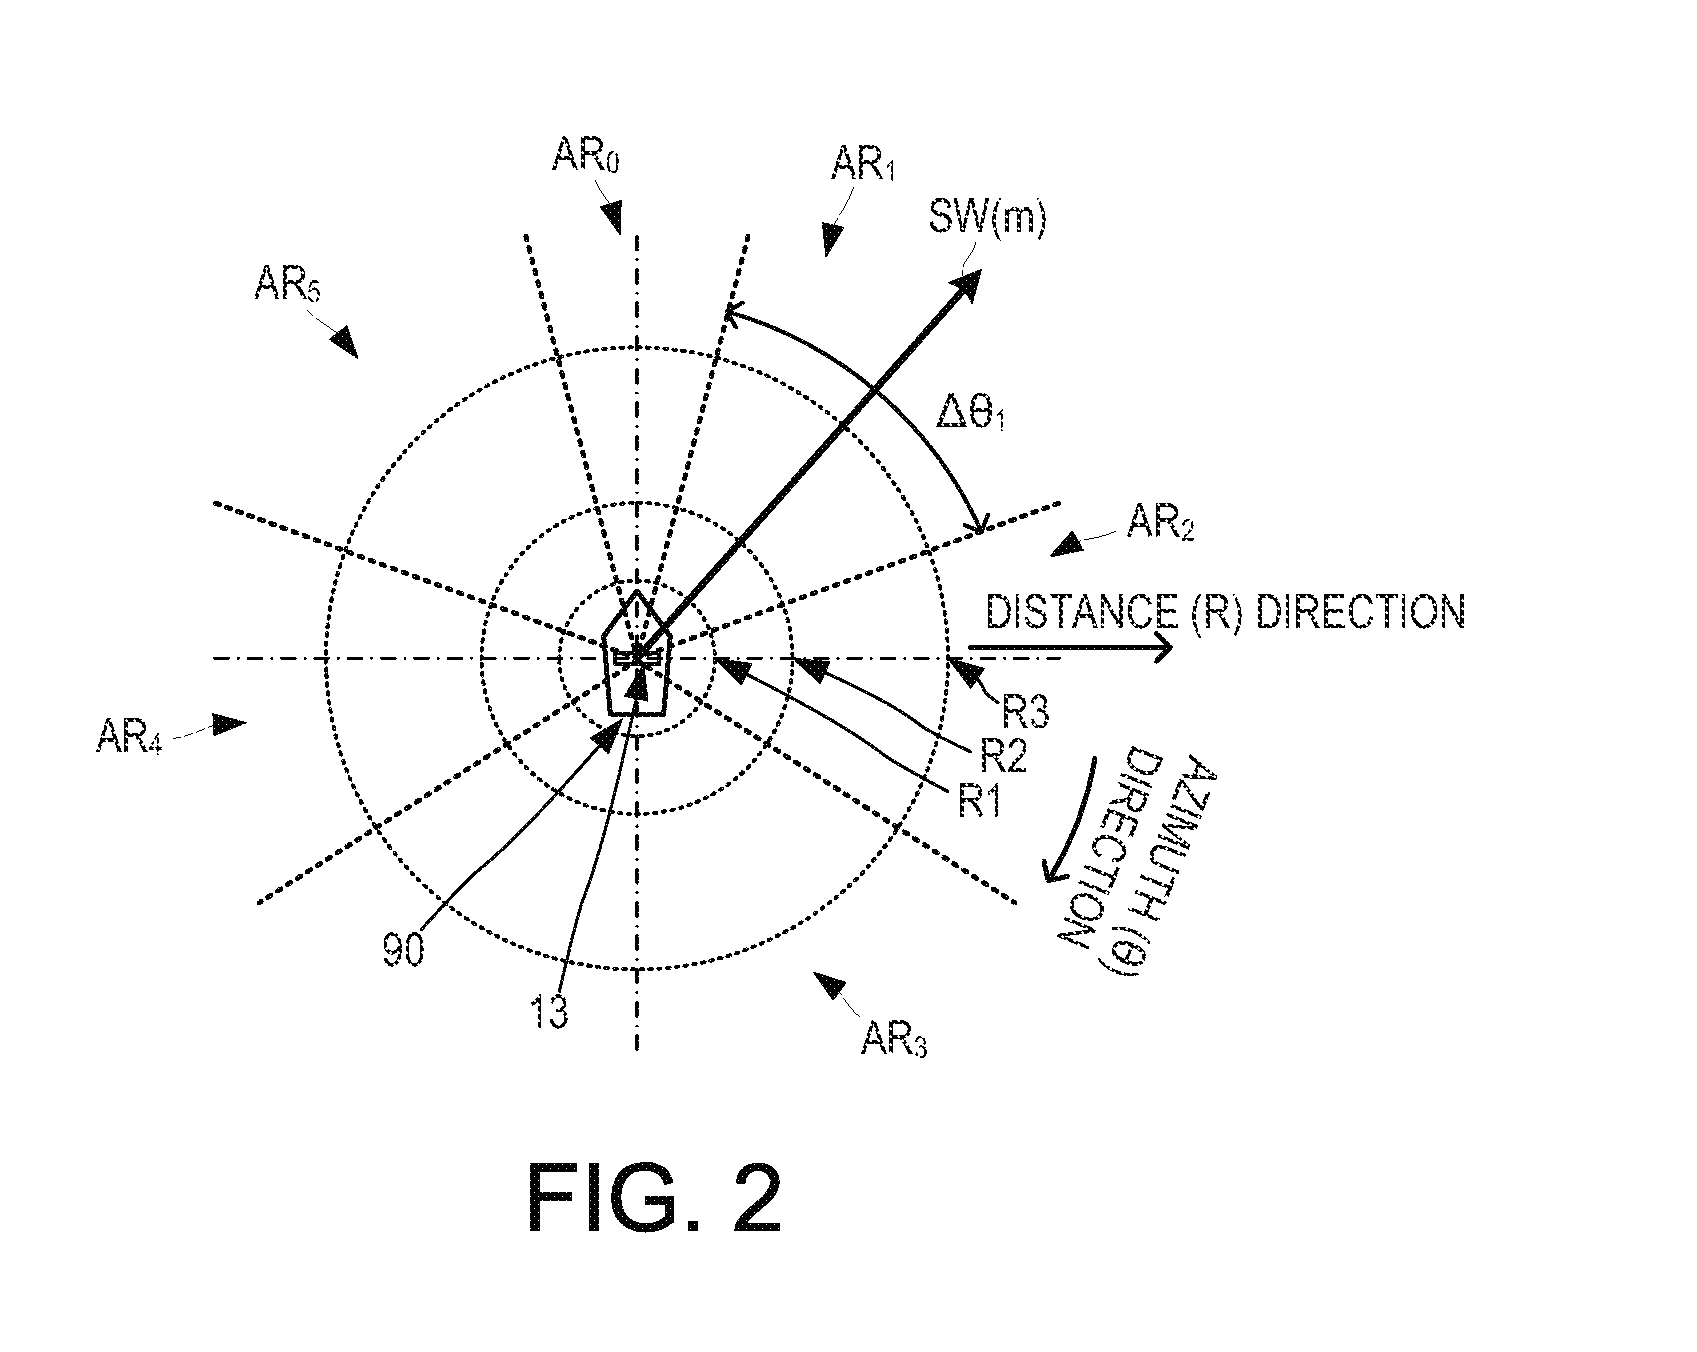 Target object detecting device and echo signal processing method